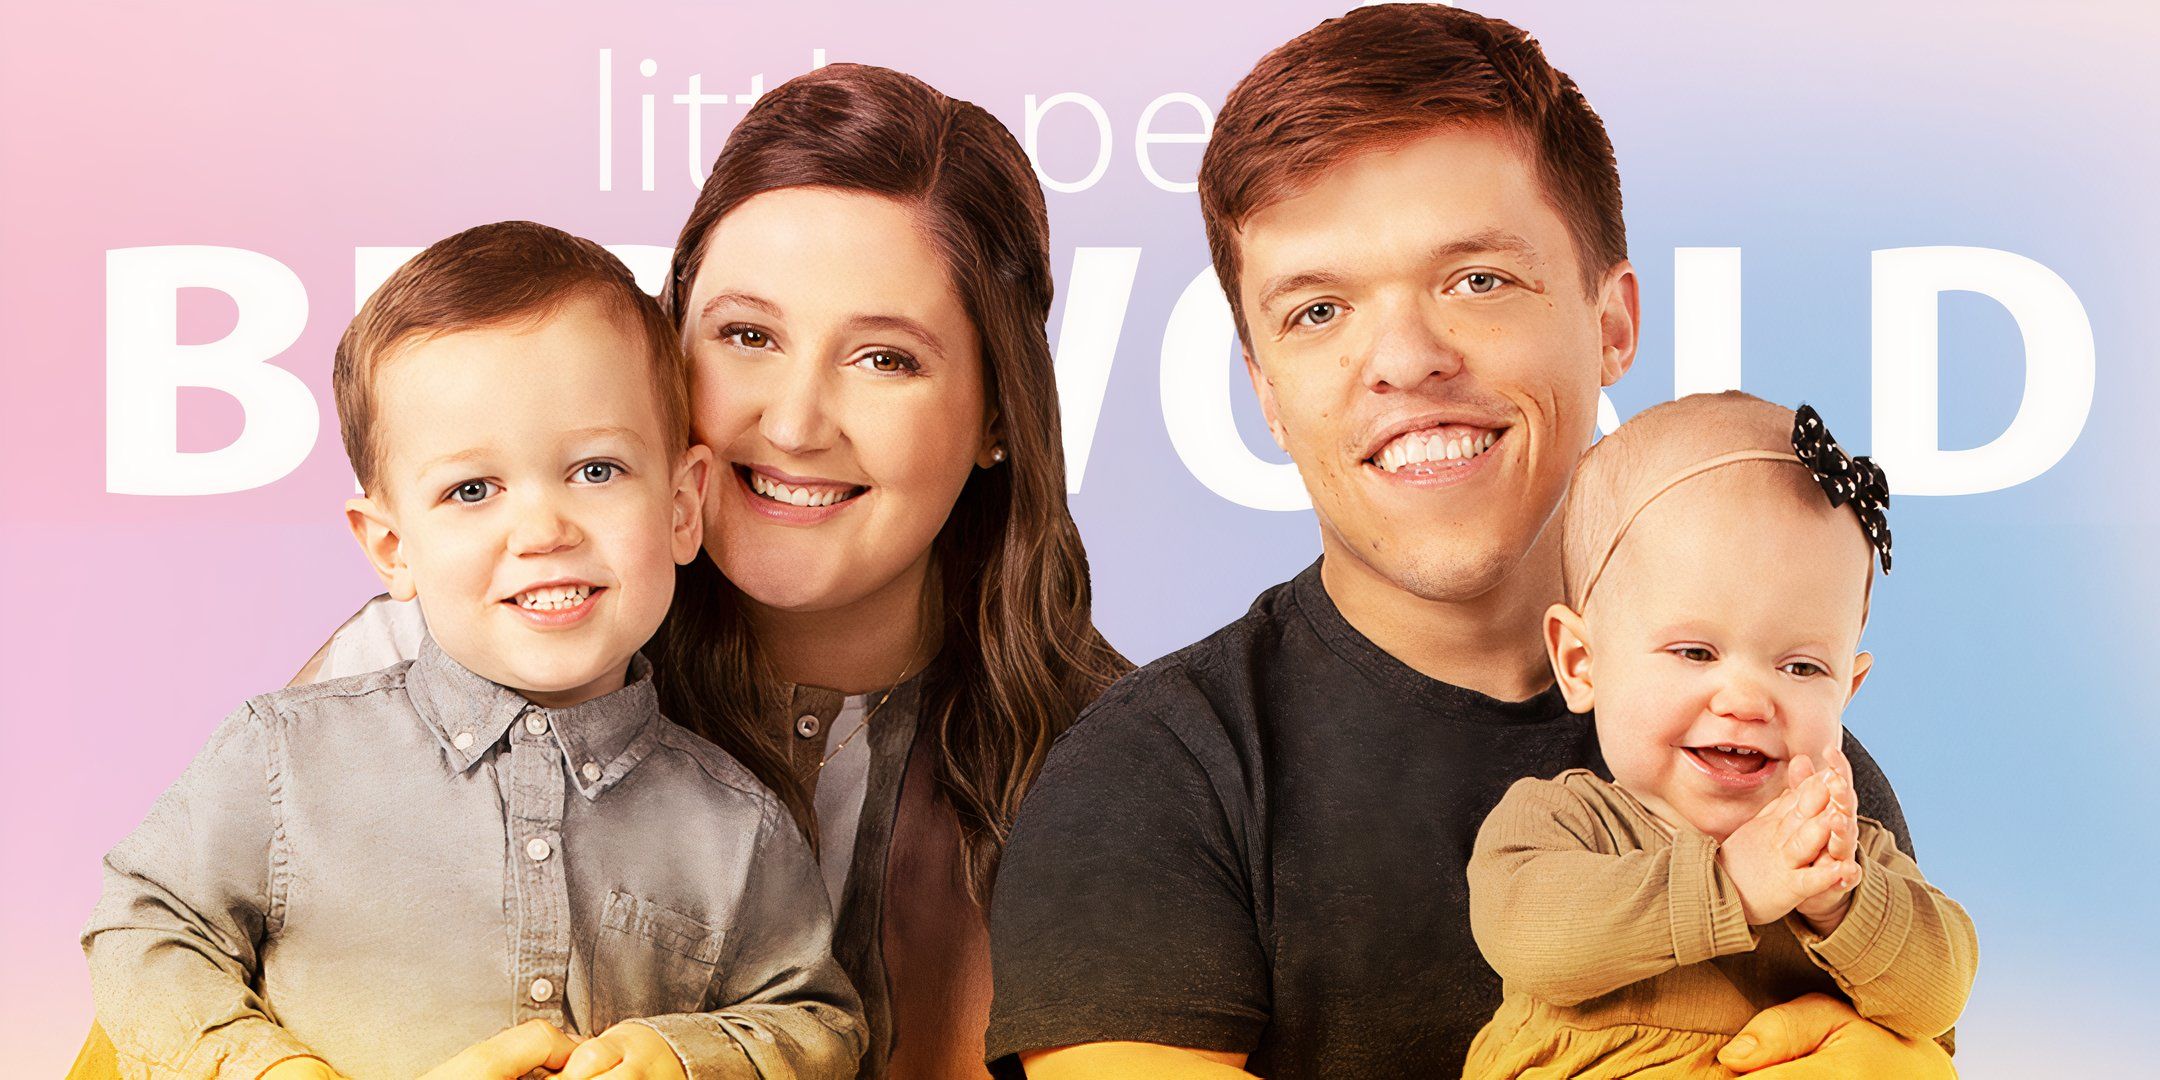 Zach And Tori Roloff's Lives Since Leaving 'Little People, Big World'